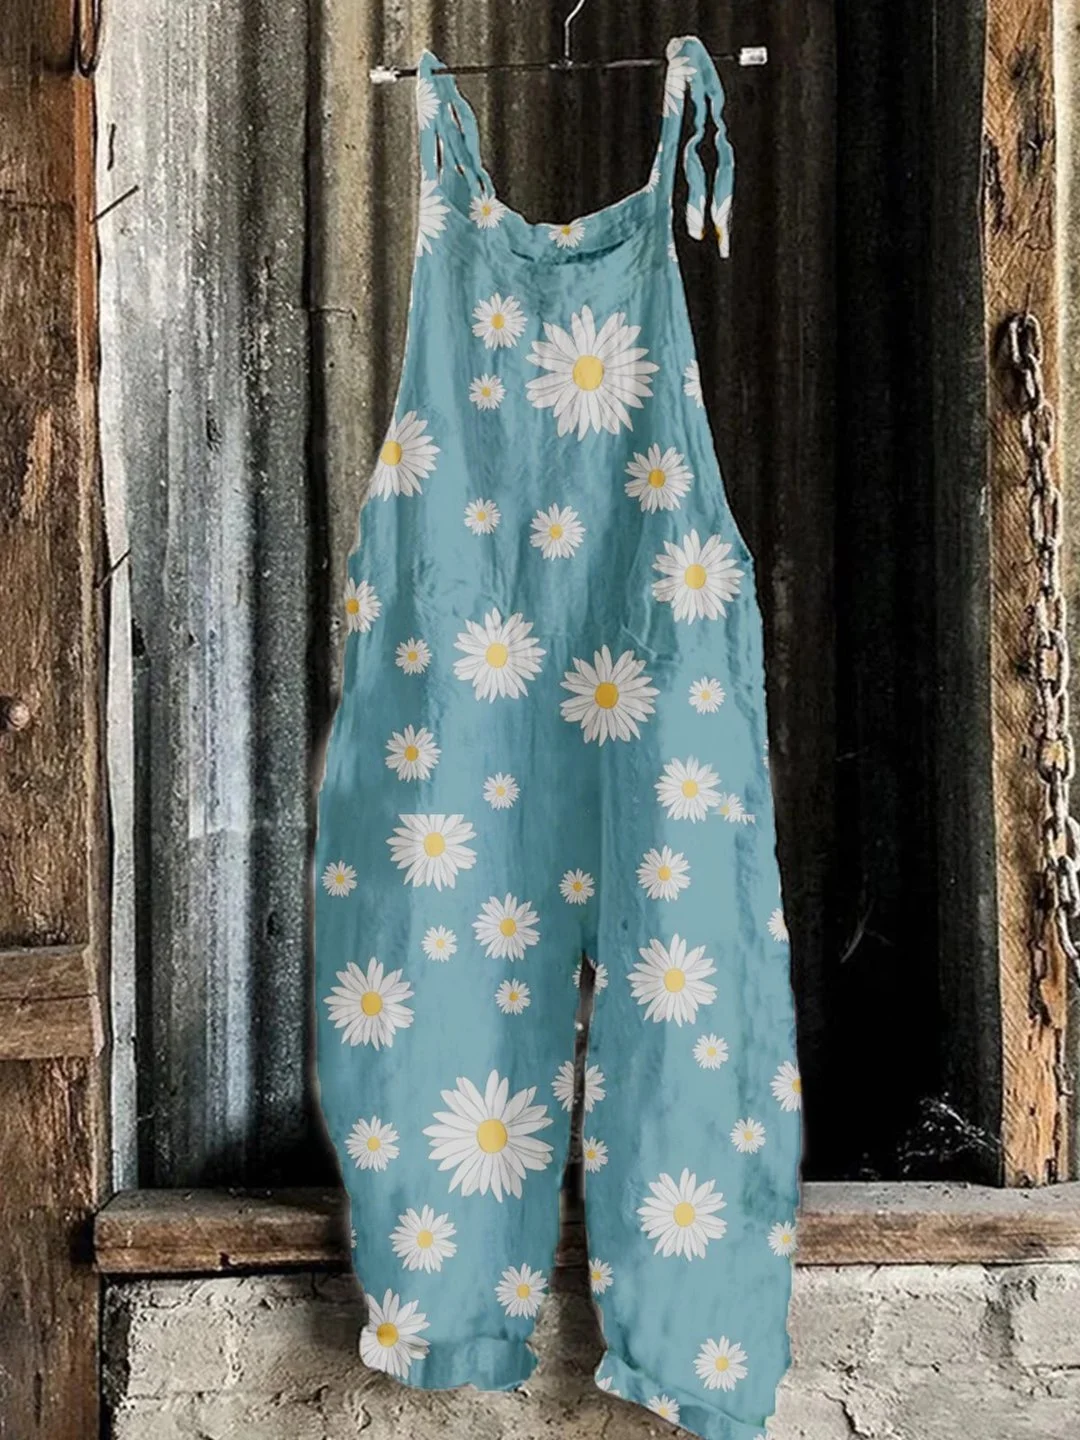 Daisy Print Casual Cotton And Linen Overalls